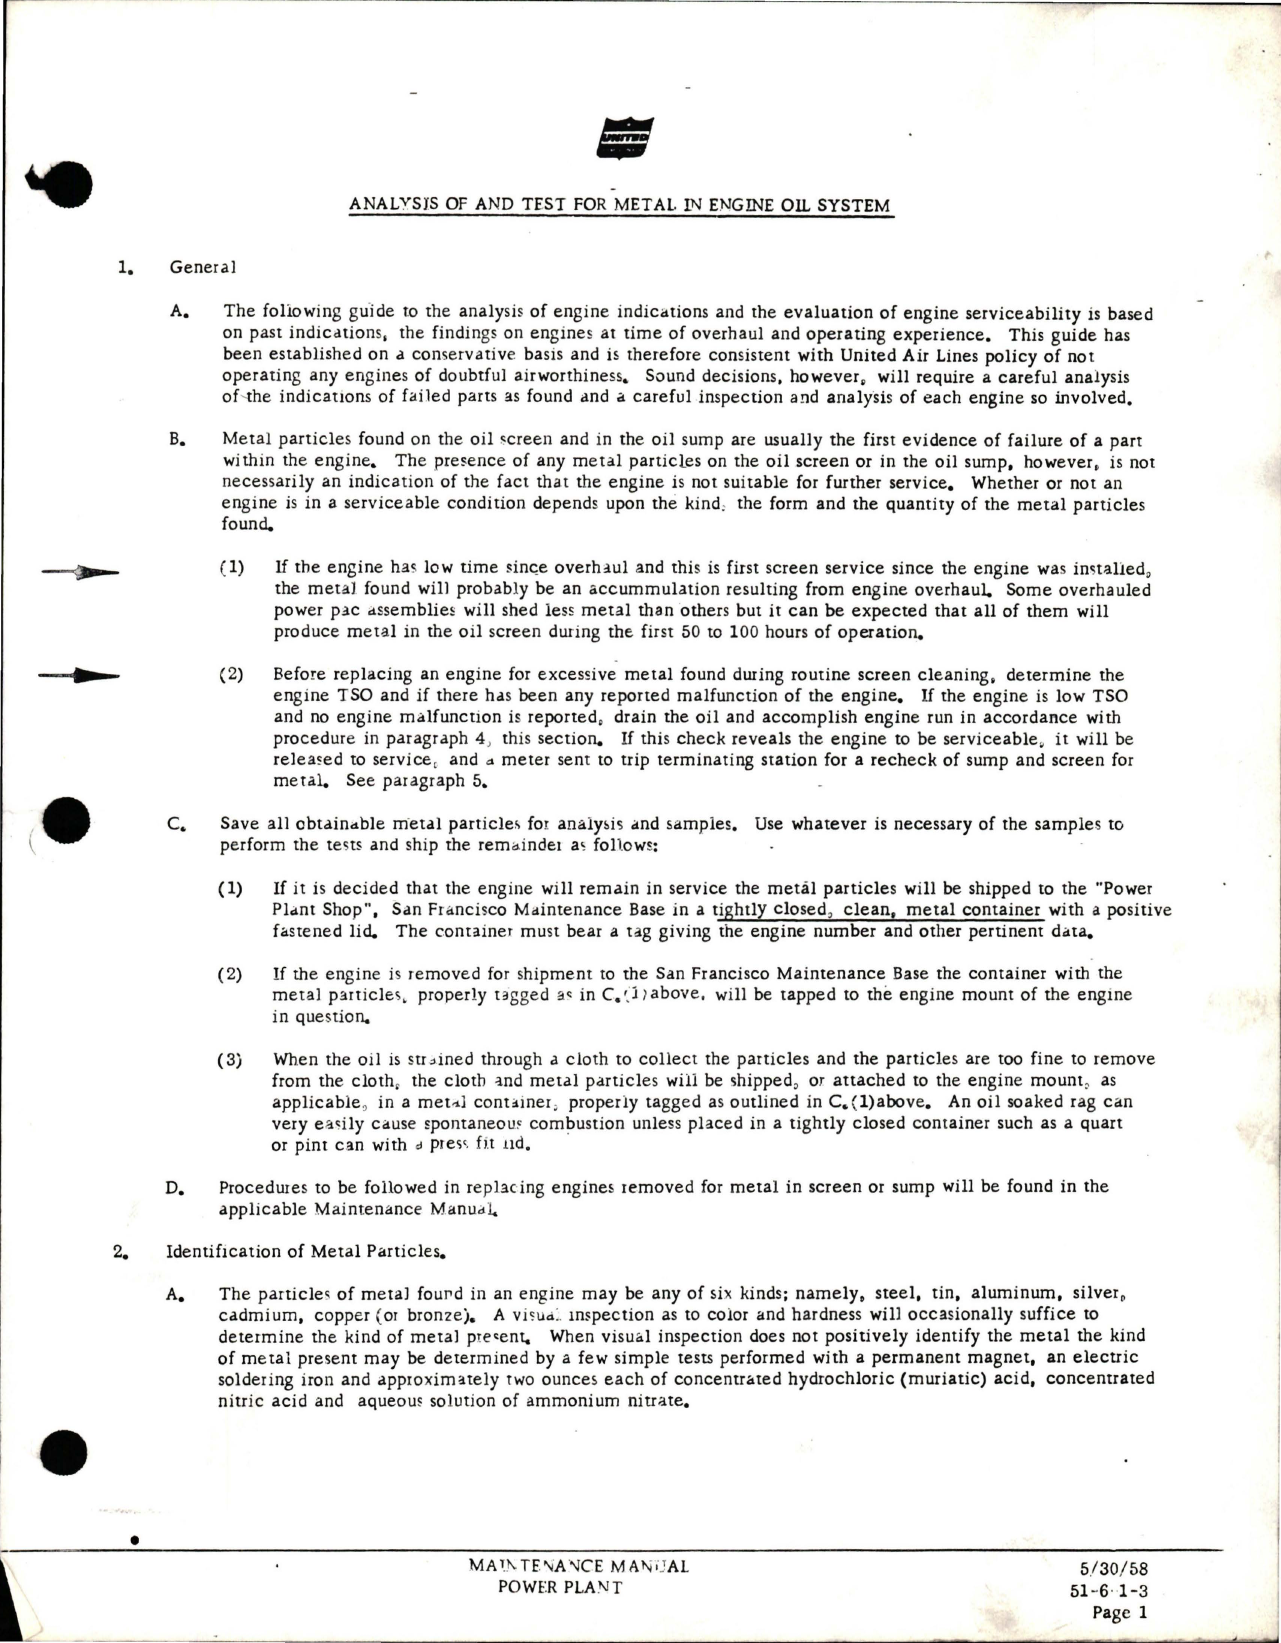 Sample page 9 from AirCorps Library document: Maintenance Manual for Power Plant - DC-6, DC-6A, DC-6B, CV-340, DC-7